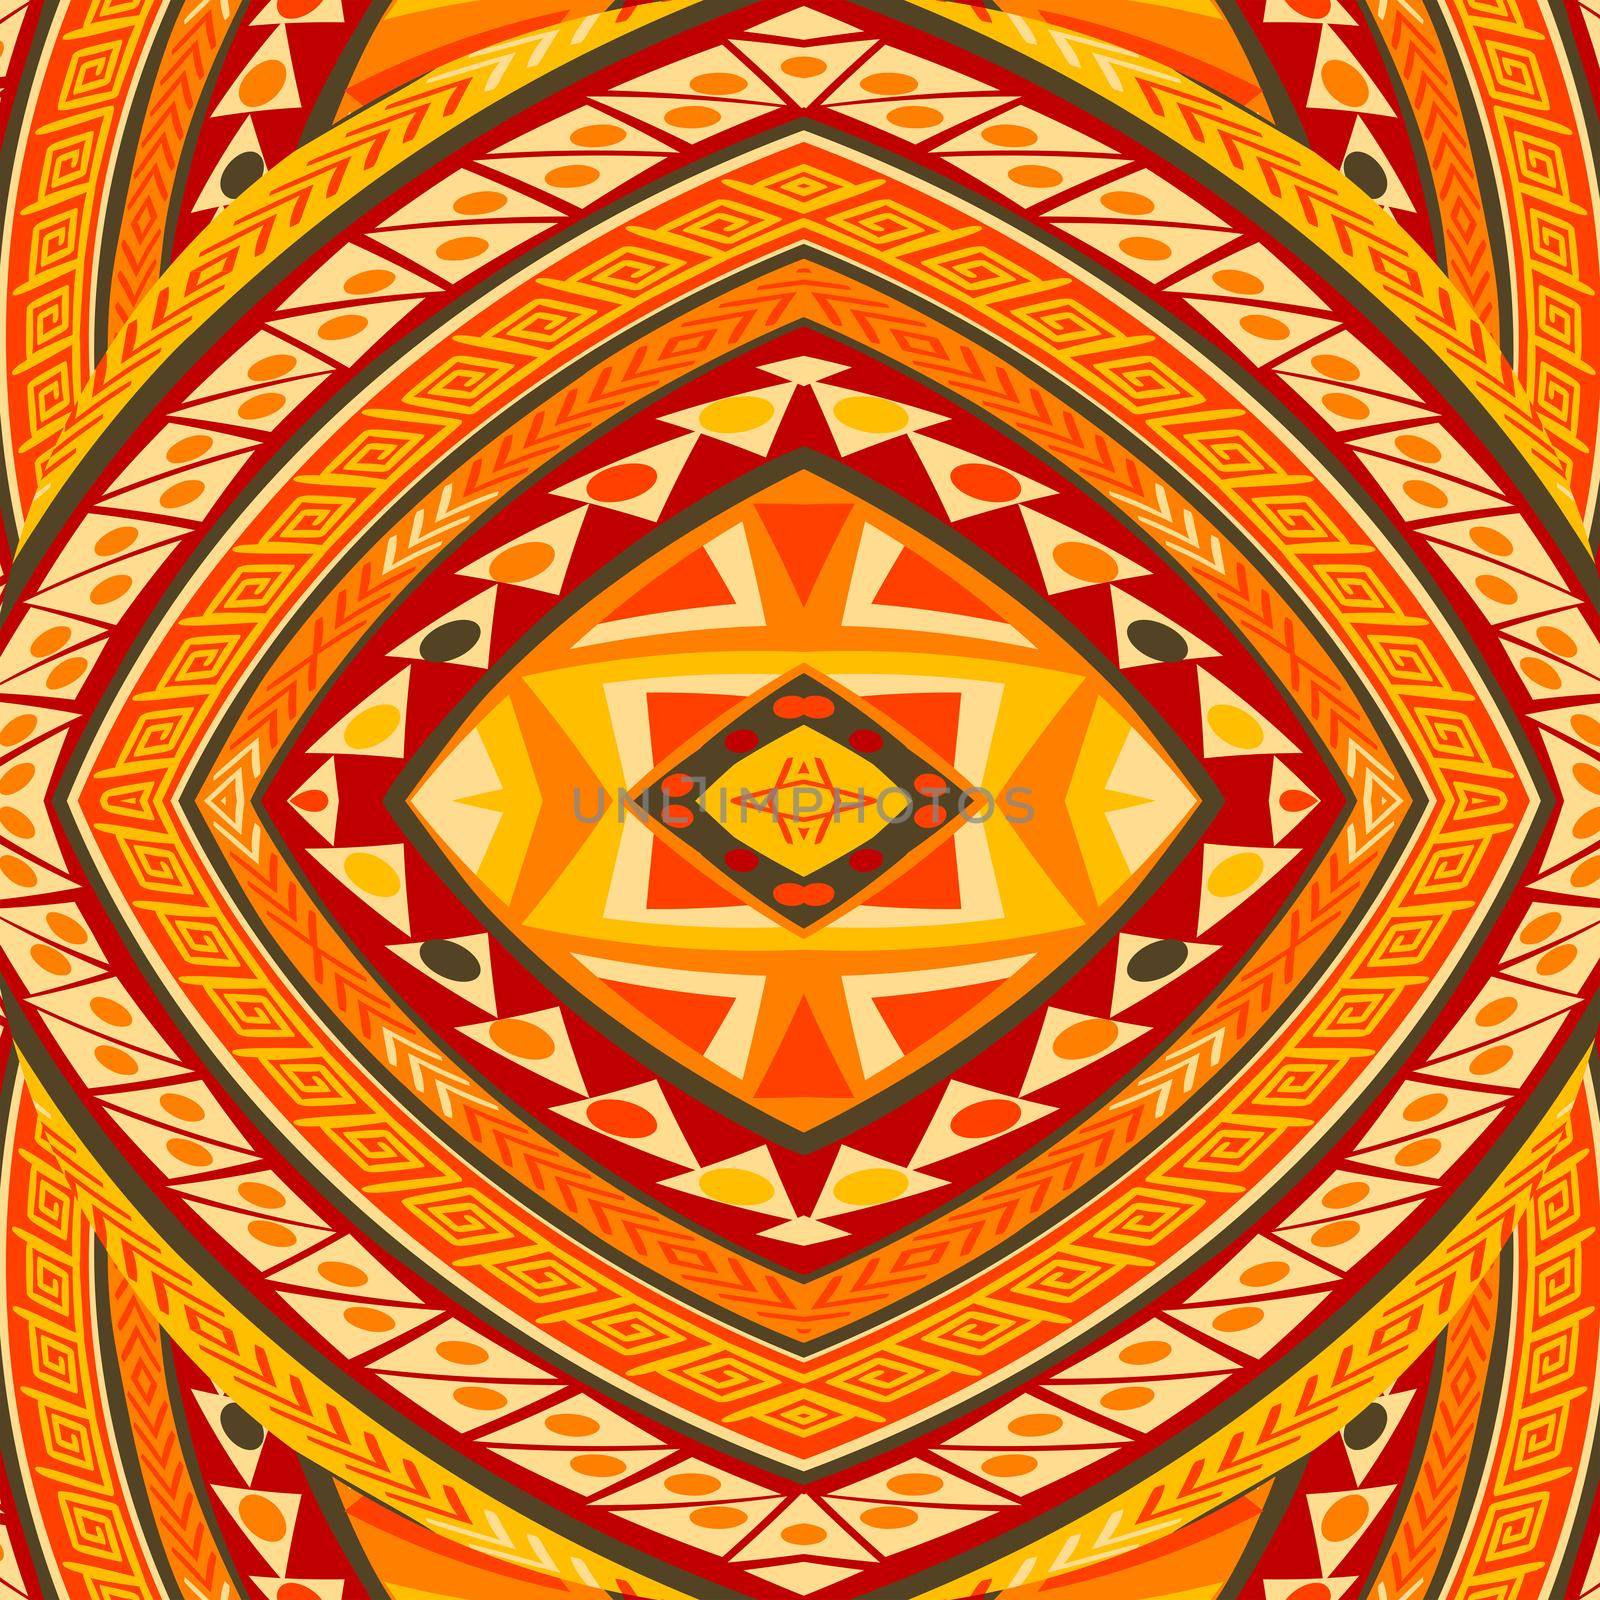 African pattern with ethnic symbols